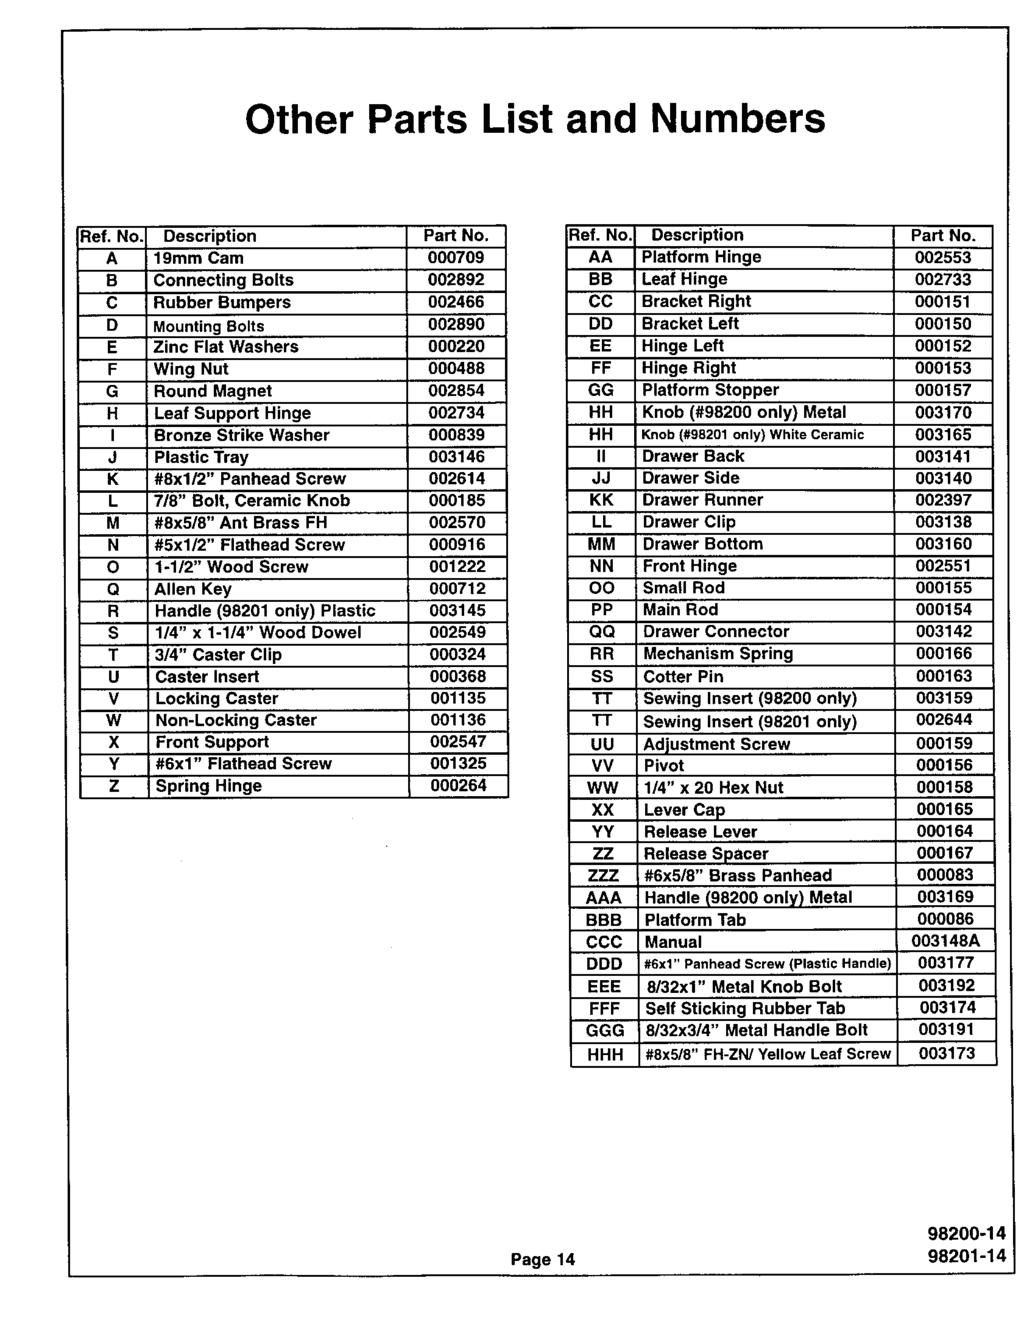 Other Parts List and Numbers Fief.